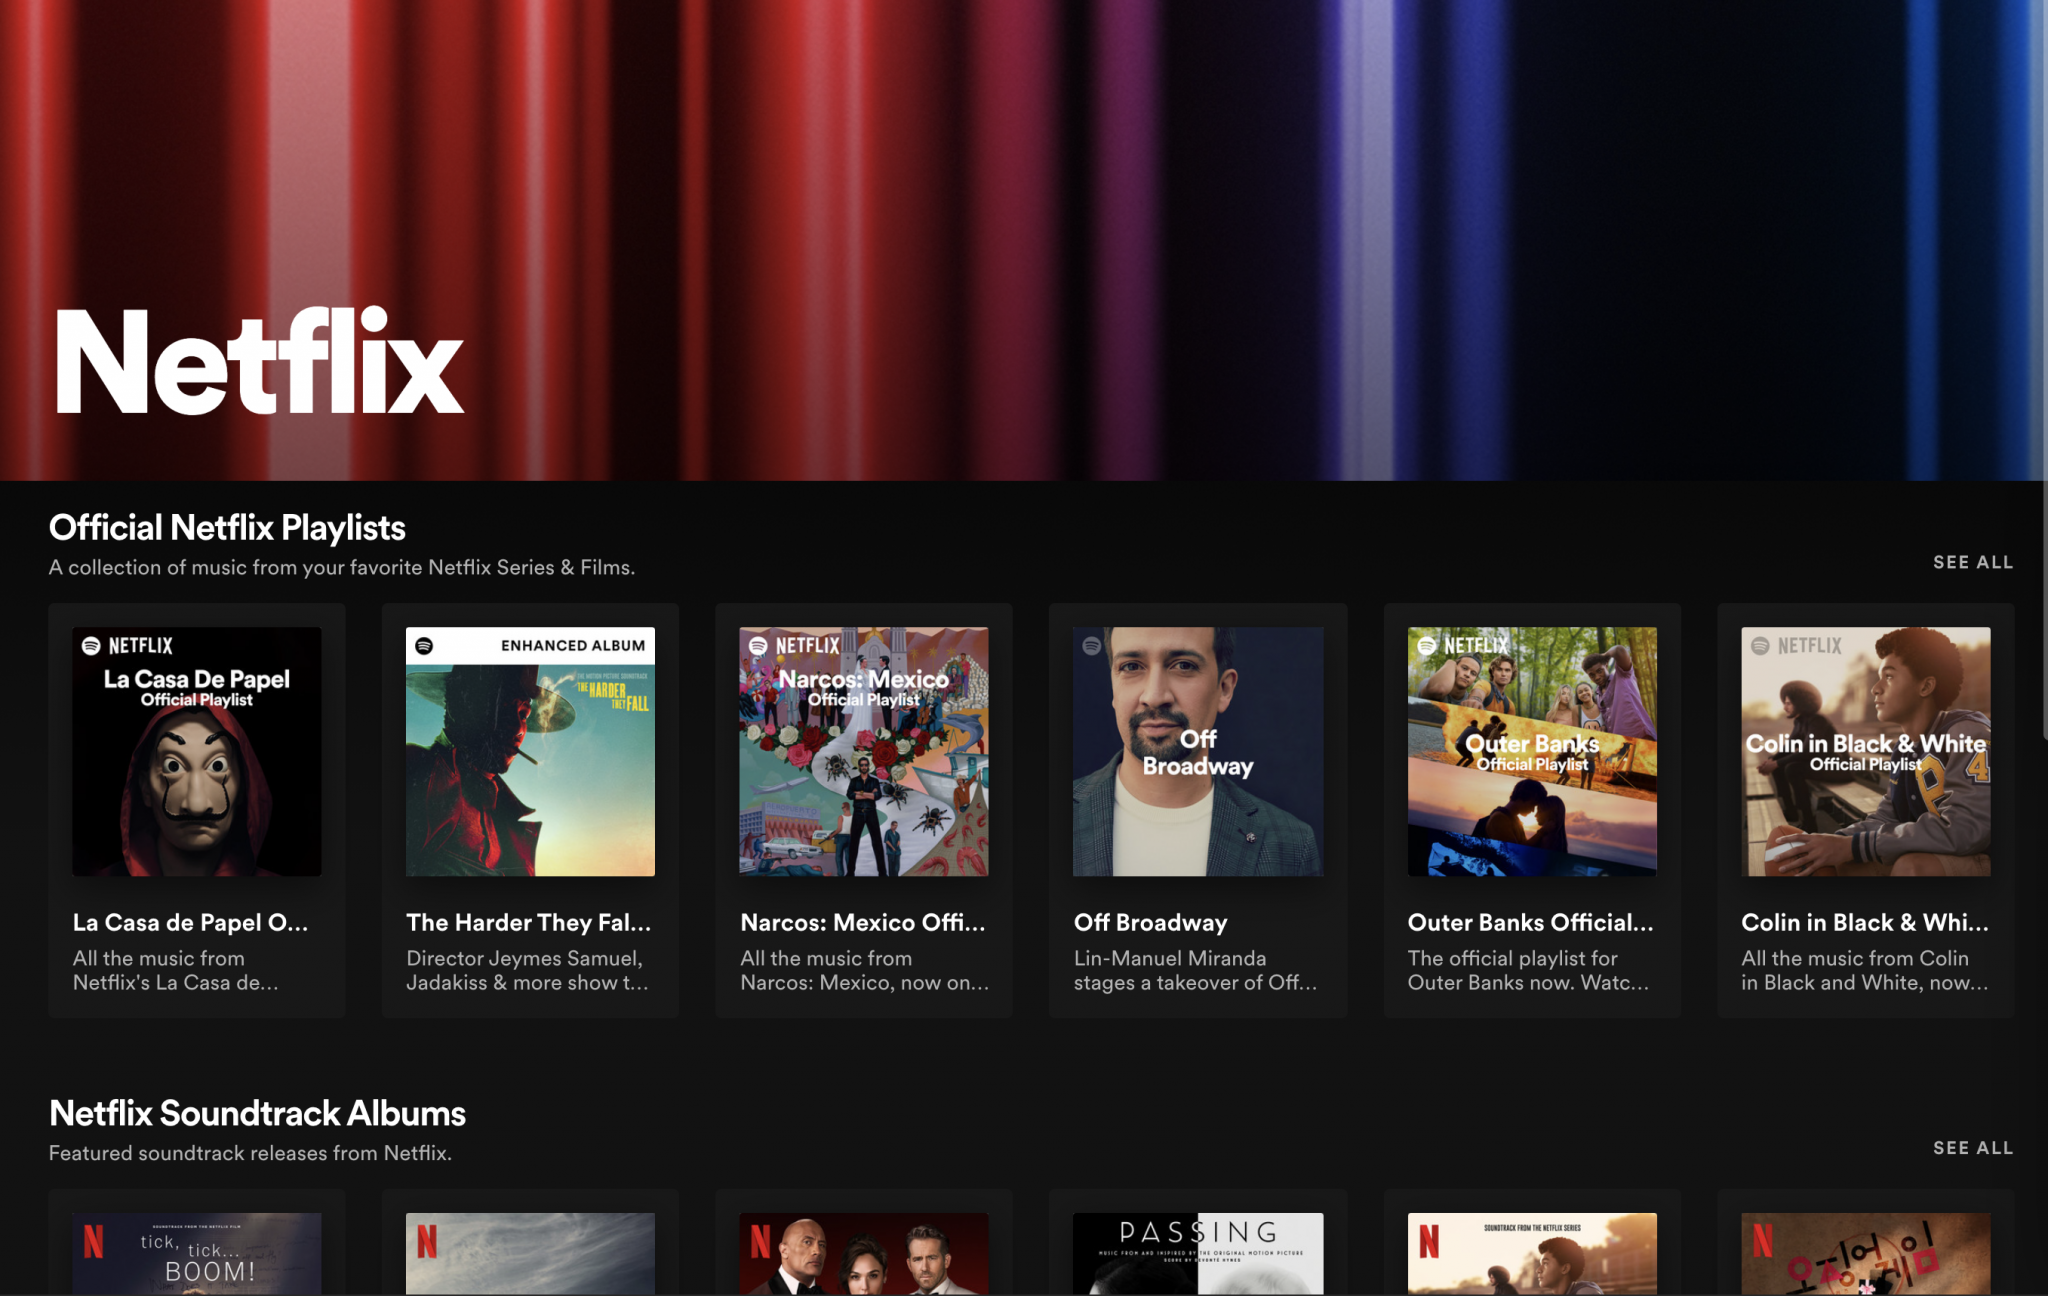 A screenshot showing some of the playlists and soundtrack albums on Spotify's new Netflix hub